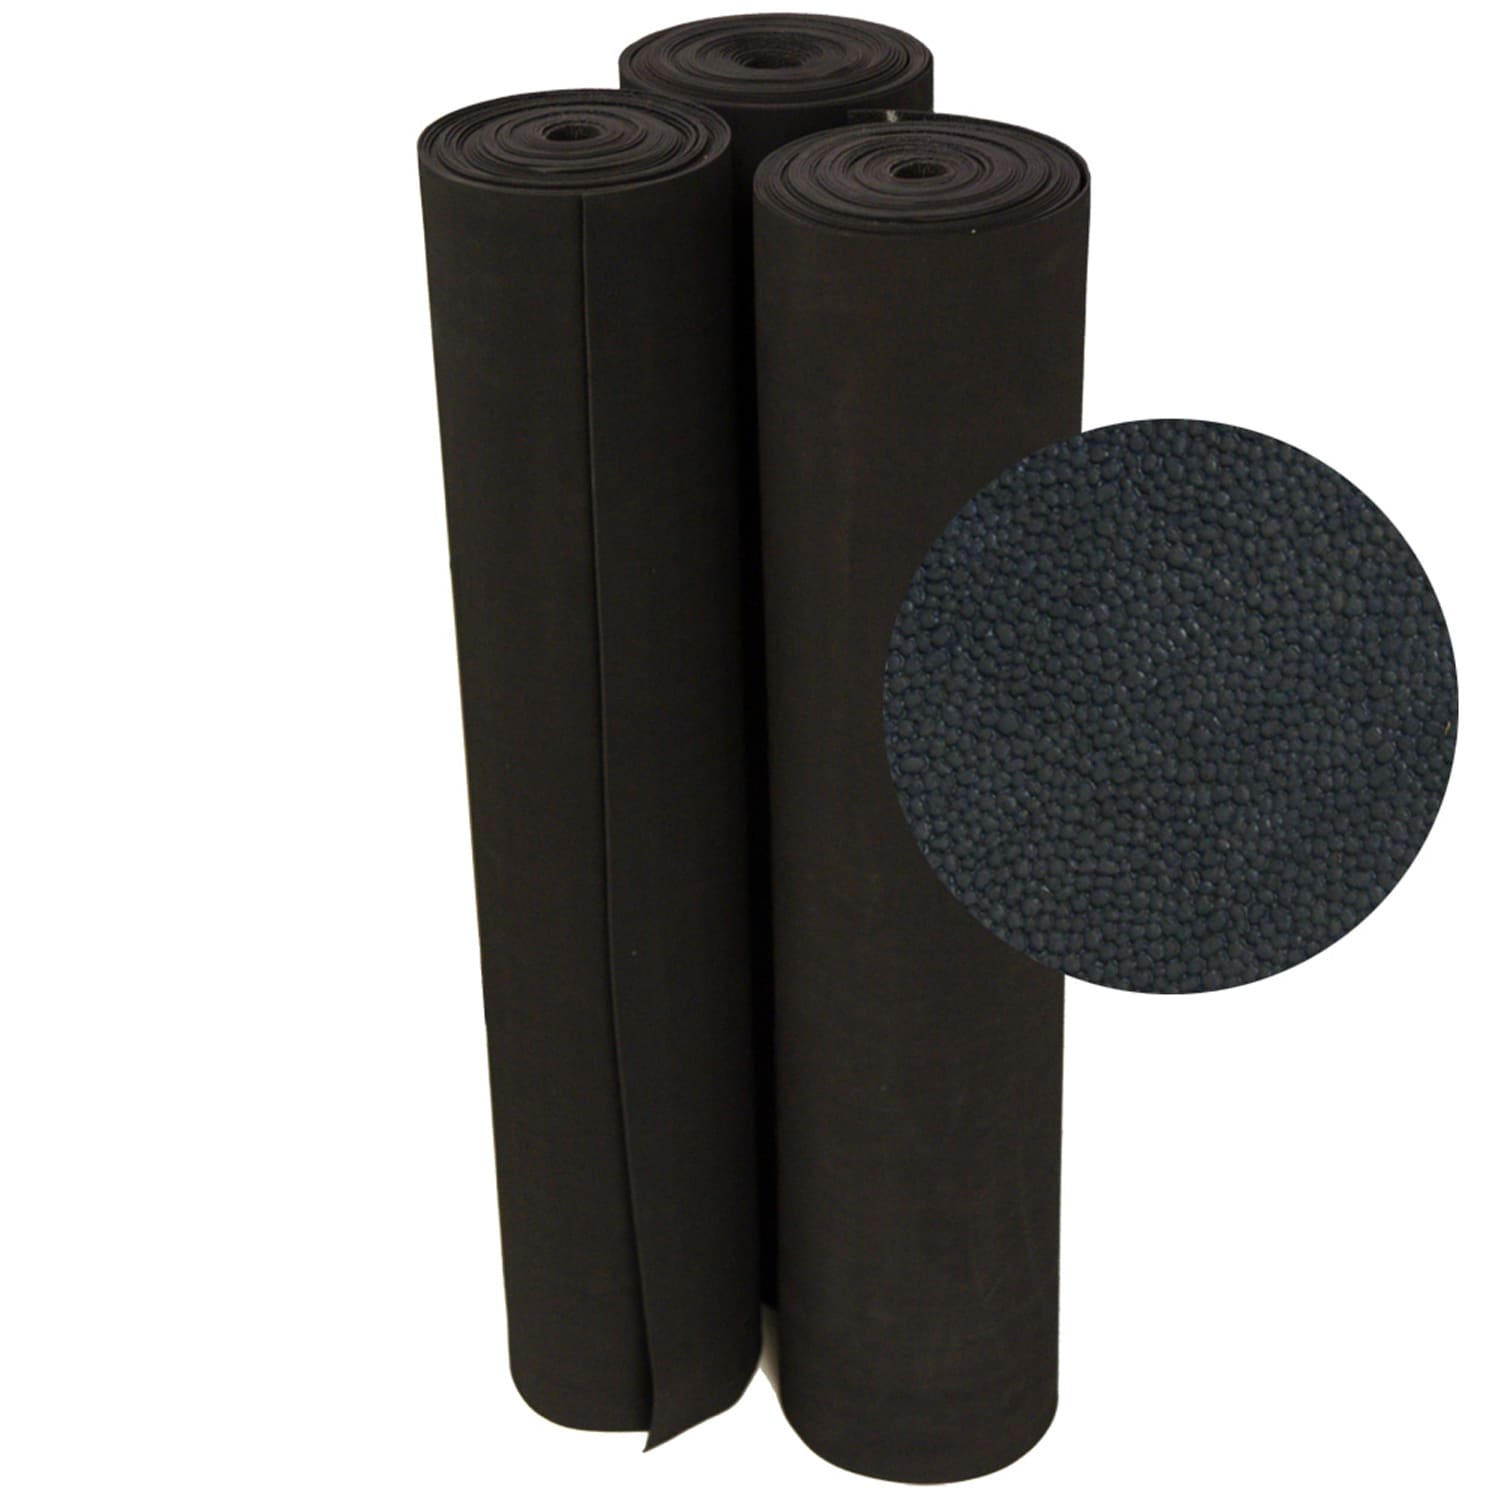 Rubber-Cal Tuff-n-Lastic Rubber Runner Mat - 1/8 Inches x 48 Inches x 3ft Rolled Rubber Flooring - Black